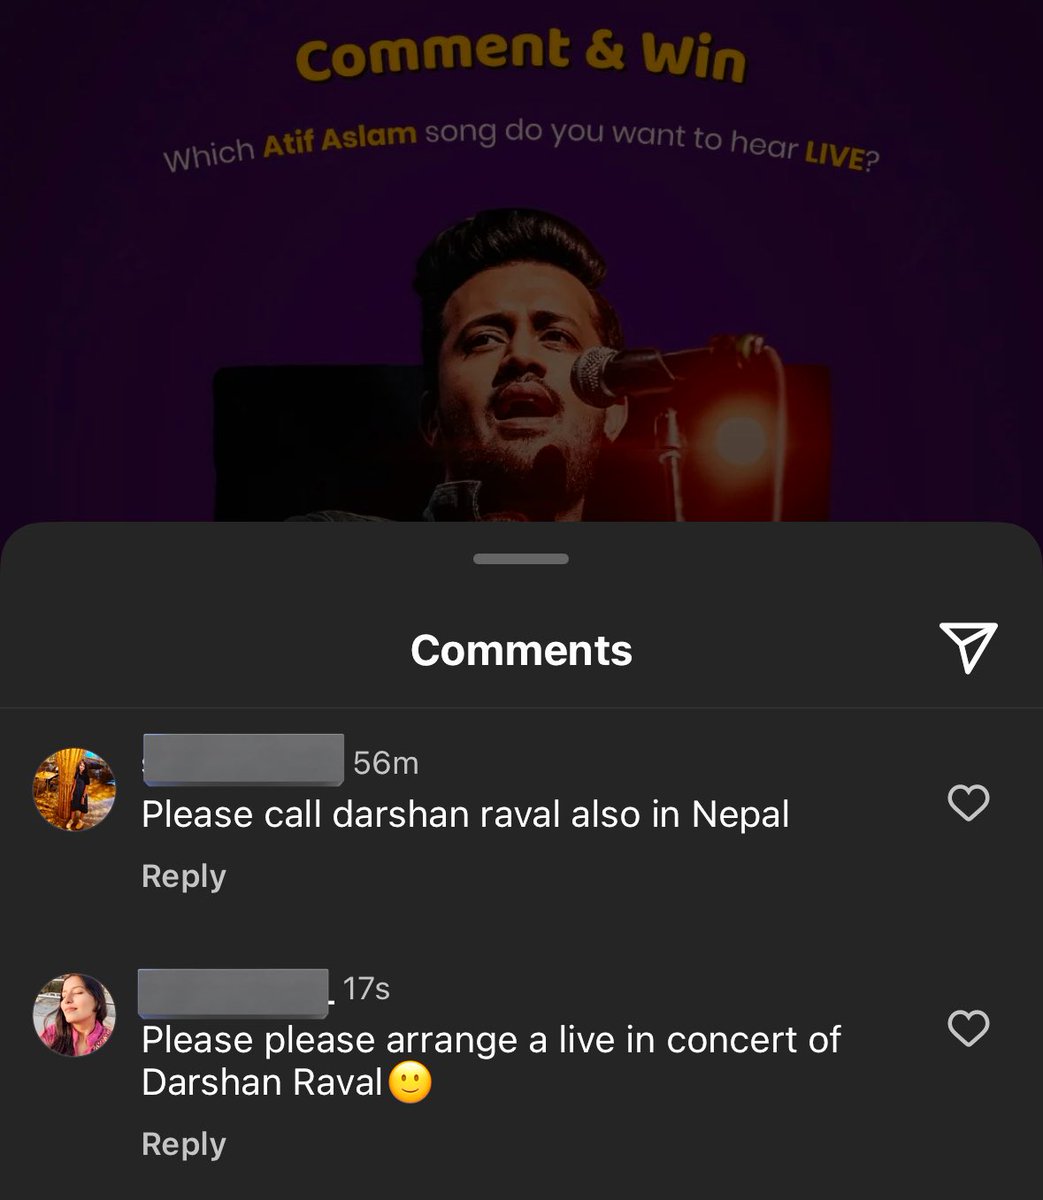 Meanwhile 
We (nepali darshaners) in the comments😭🙂
@DarshanRavalDZ aajao yaar:)